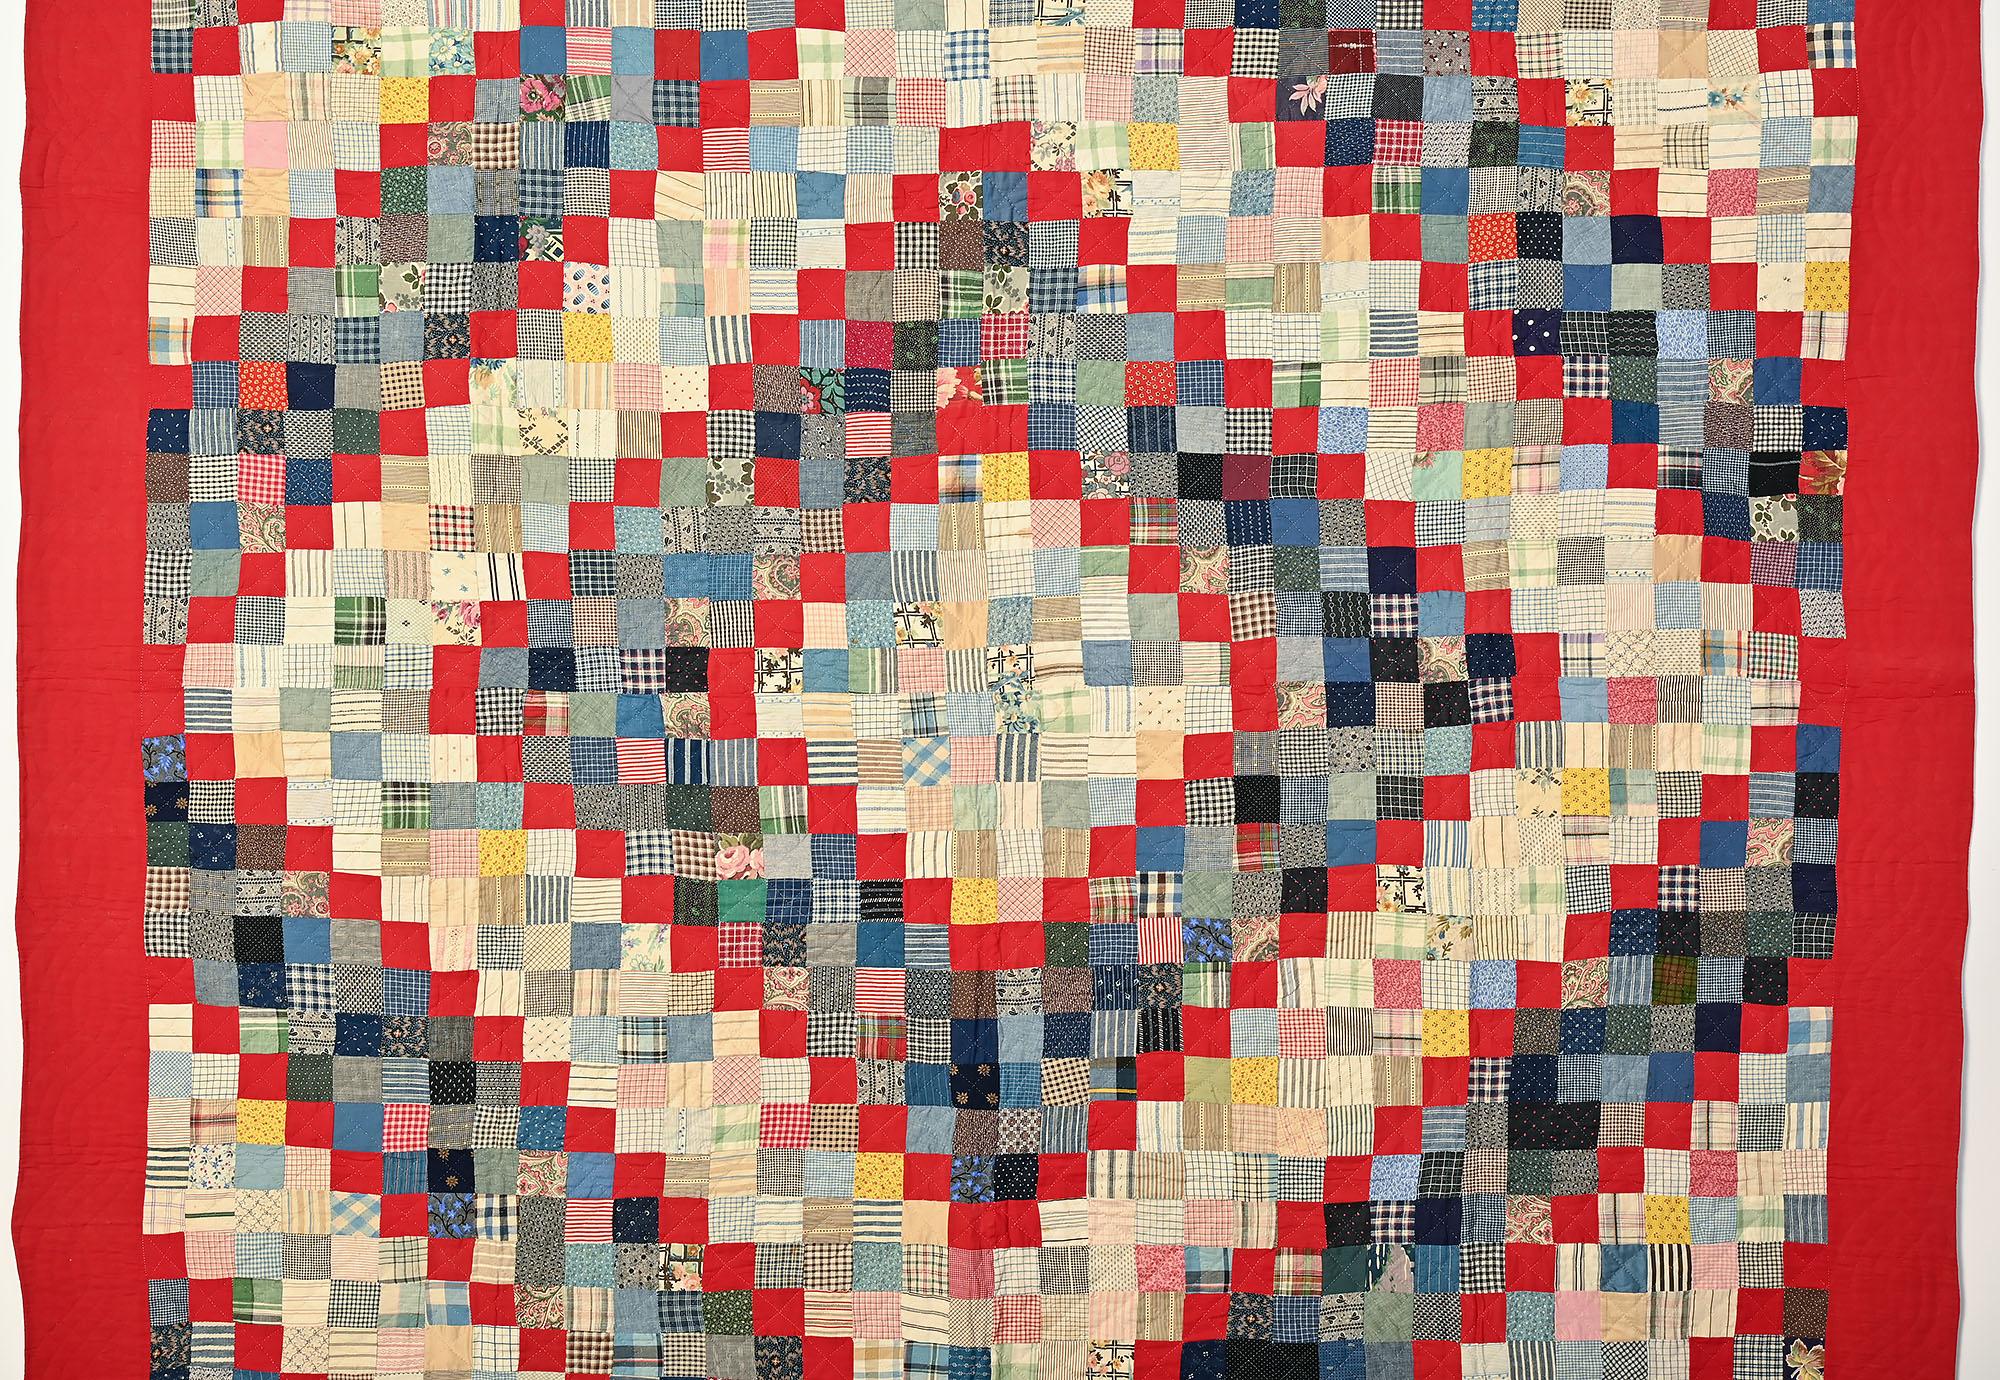 This Barnraising pattern quilt is made with One Patches rather than the usual Log Cabin strips. The sold reds against the printed fabrics make a very strong statement. The prints are a combination of stripes; plaids; calicoes and florals. Somehow,